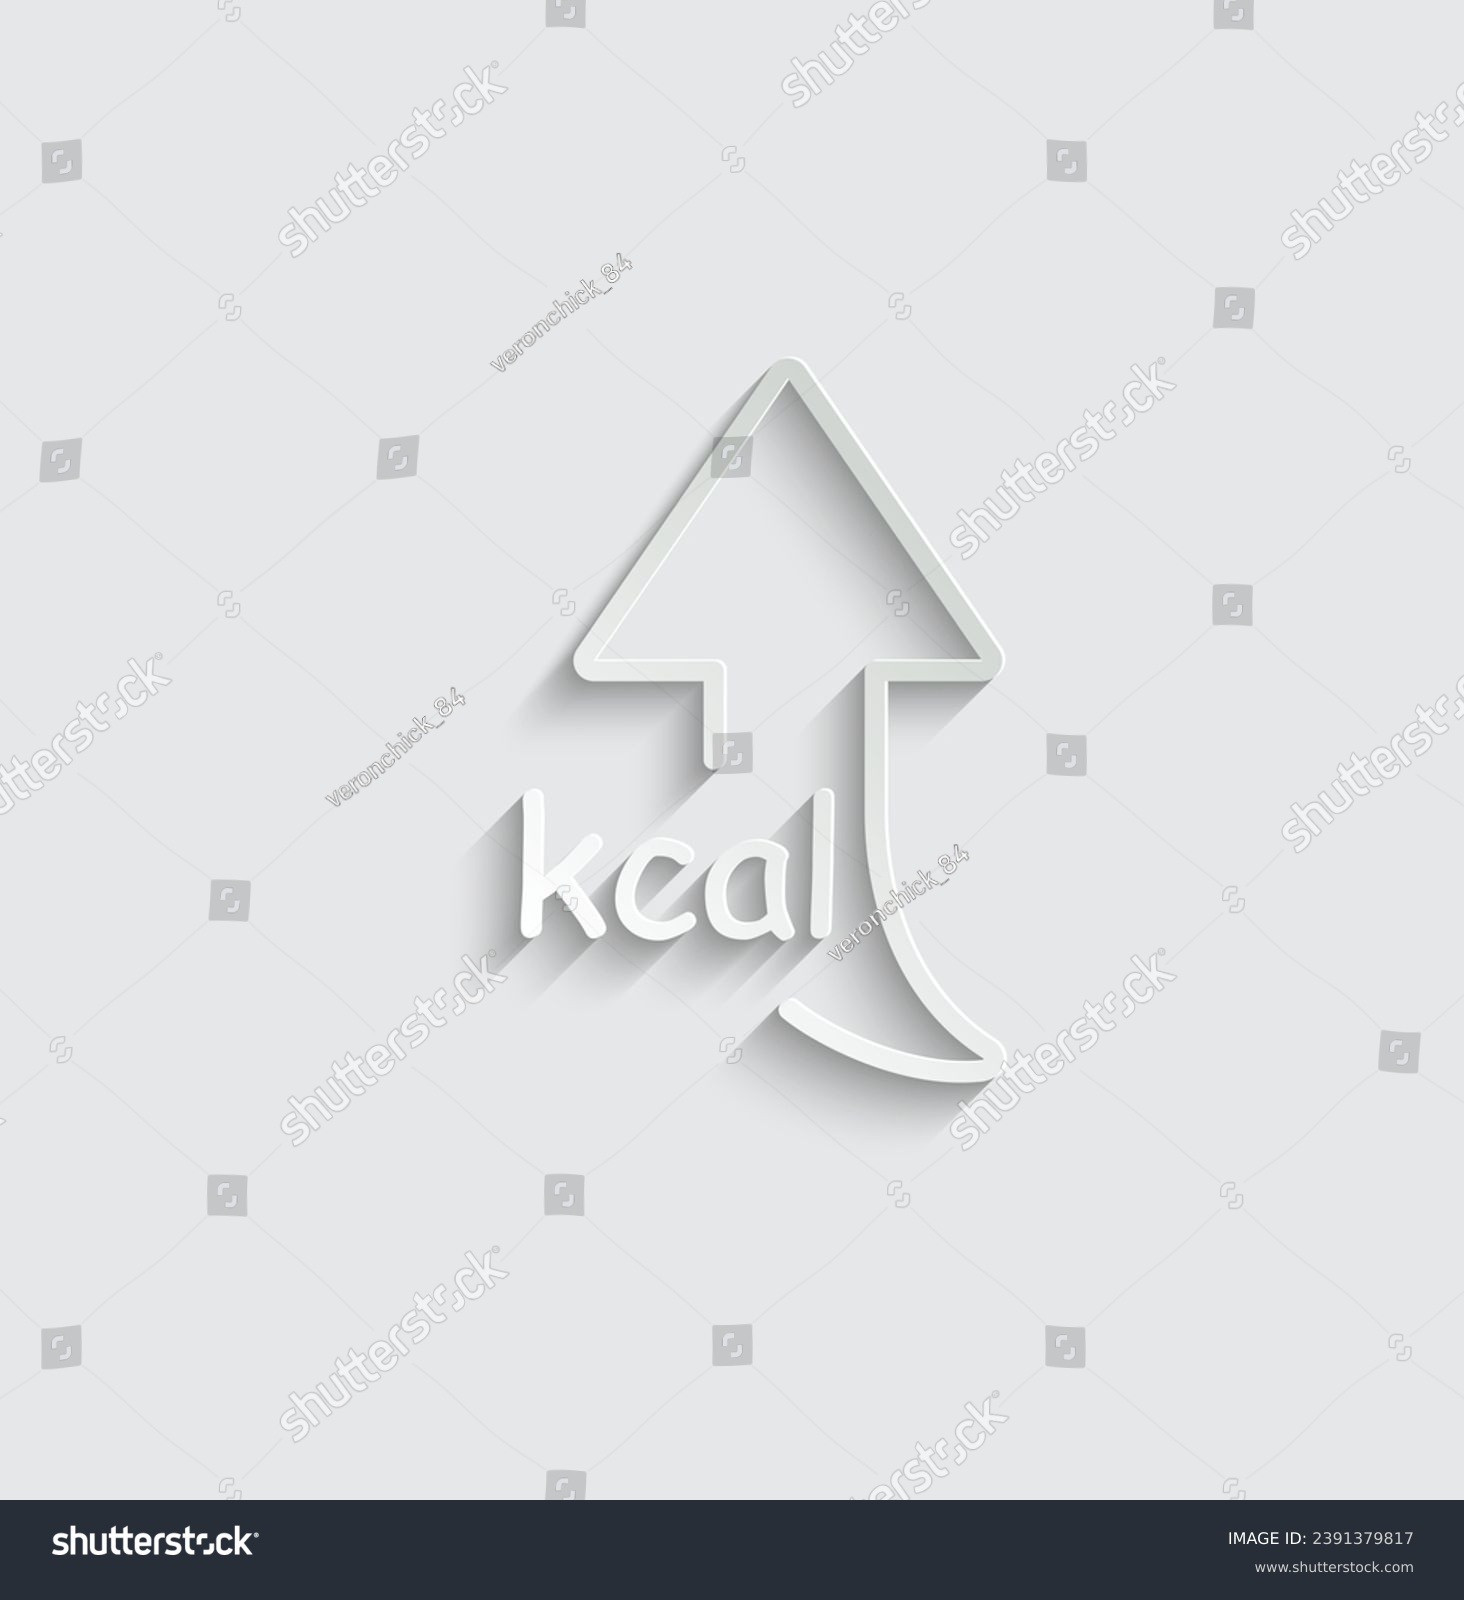 SVG of paper calorie icon vector diet sign kcal icon svg